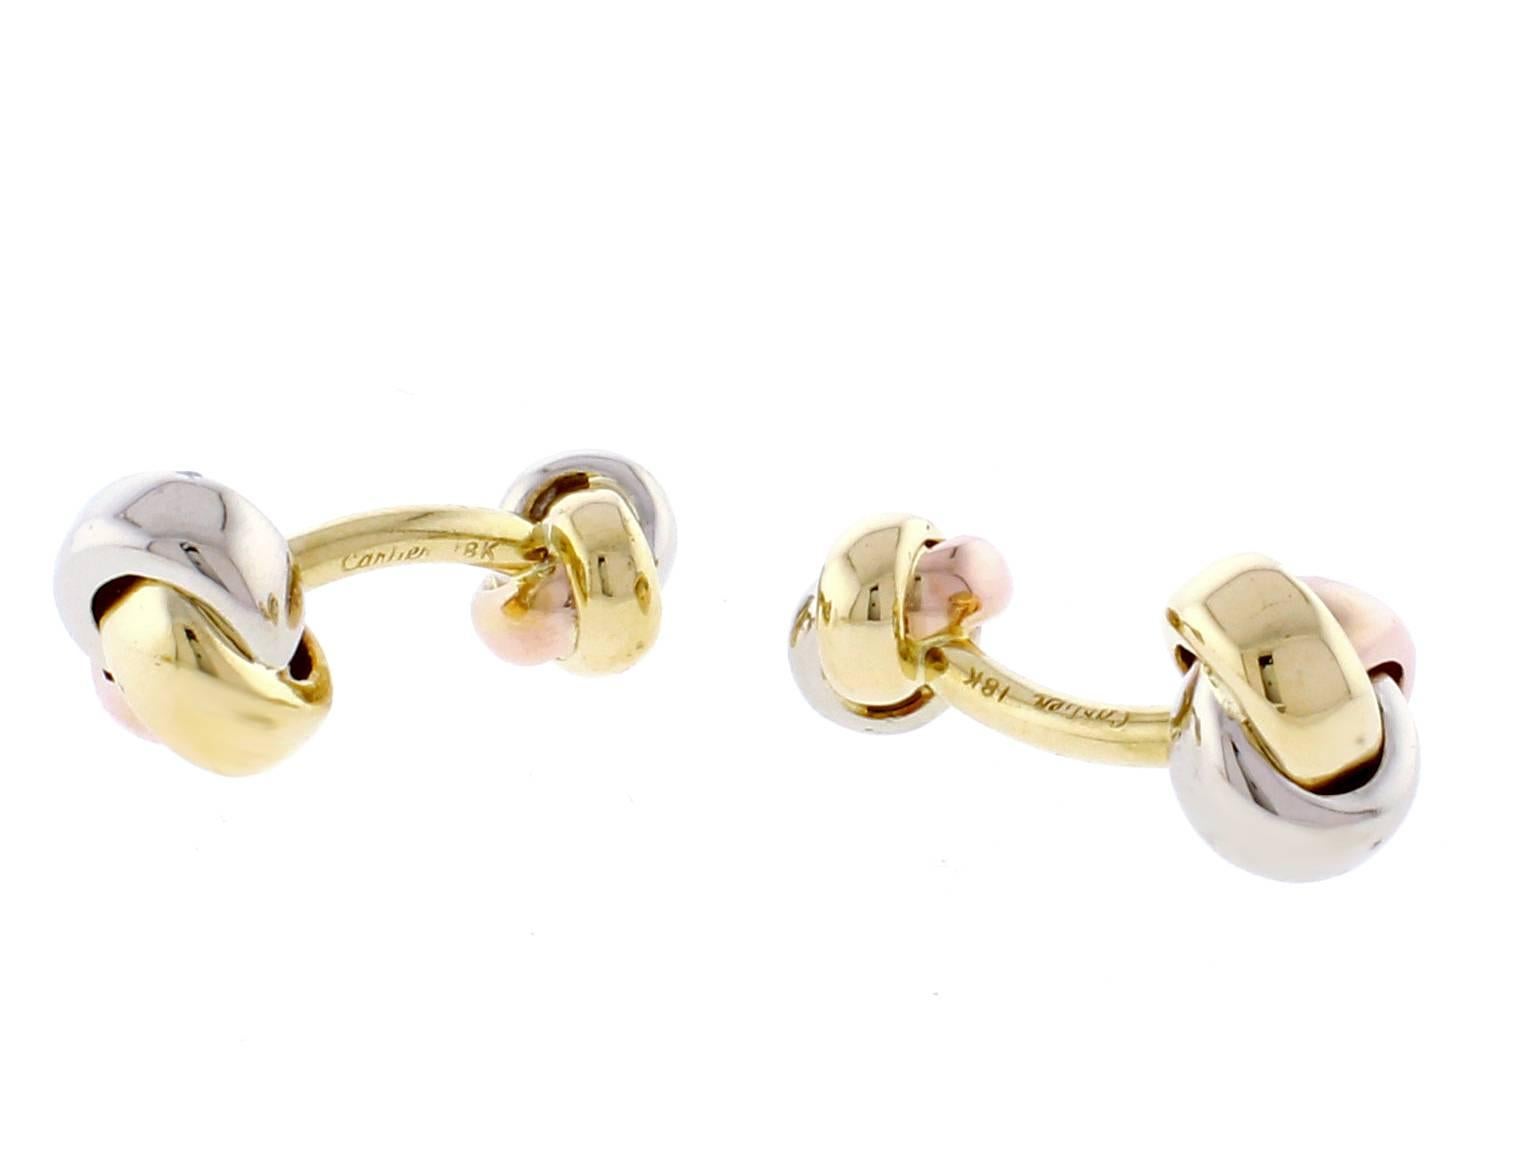 From Cartier's iconic trinity collection, a pair of love know cufflinks. Two knots of  18 karat white, yellow and pink gold form this classic cufflink design..
